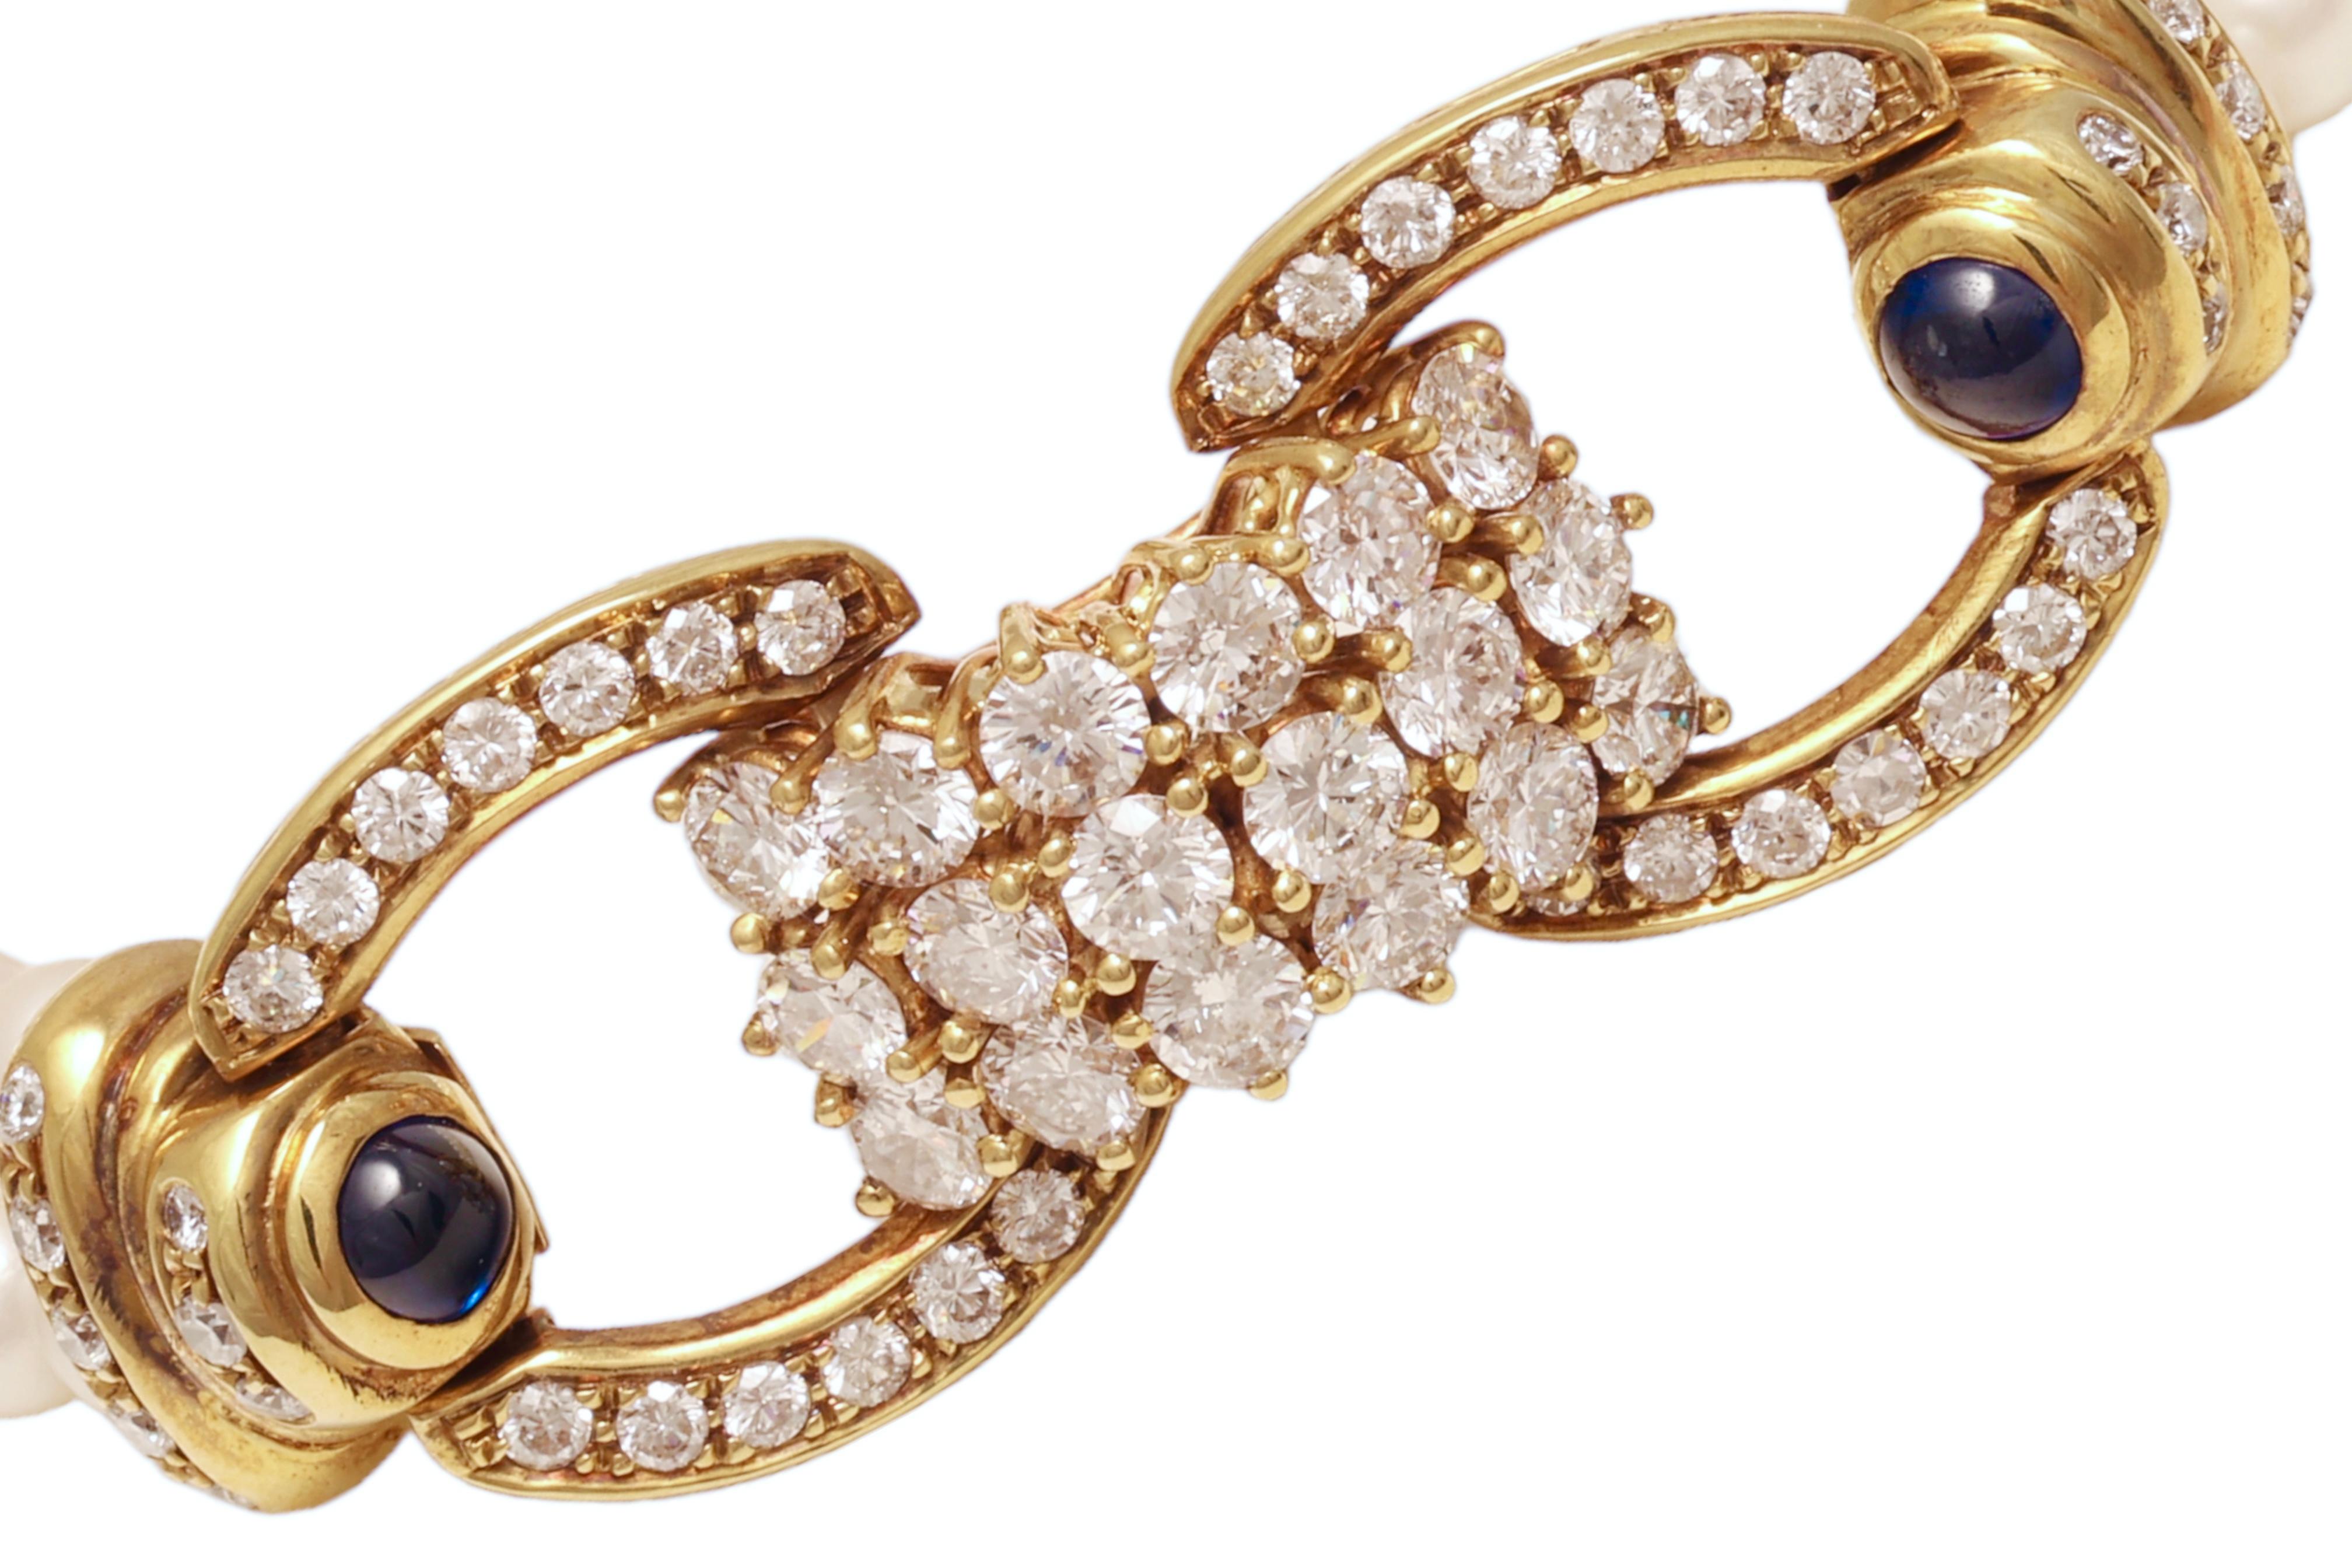 Pearl Bracelet in 18kt Yellow Gold Set With 3.58ct. Diamonds, Pearls & Sapphires For Sale 3